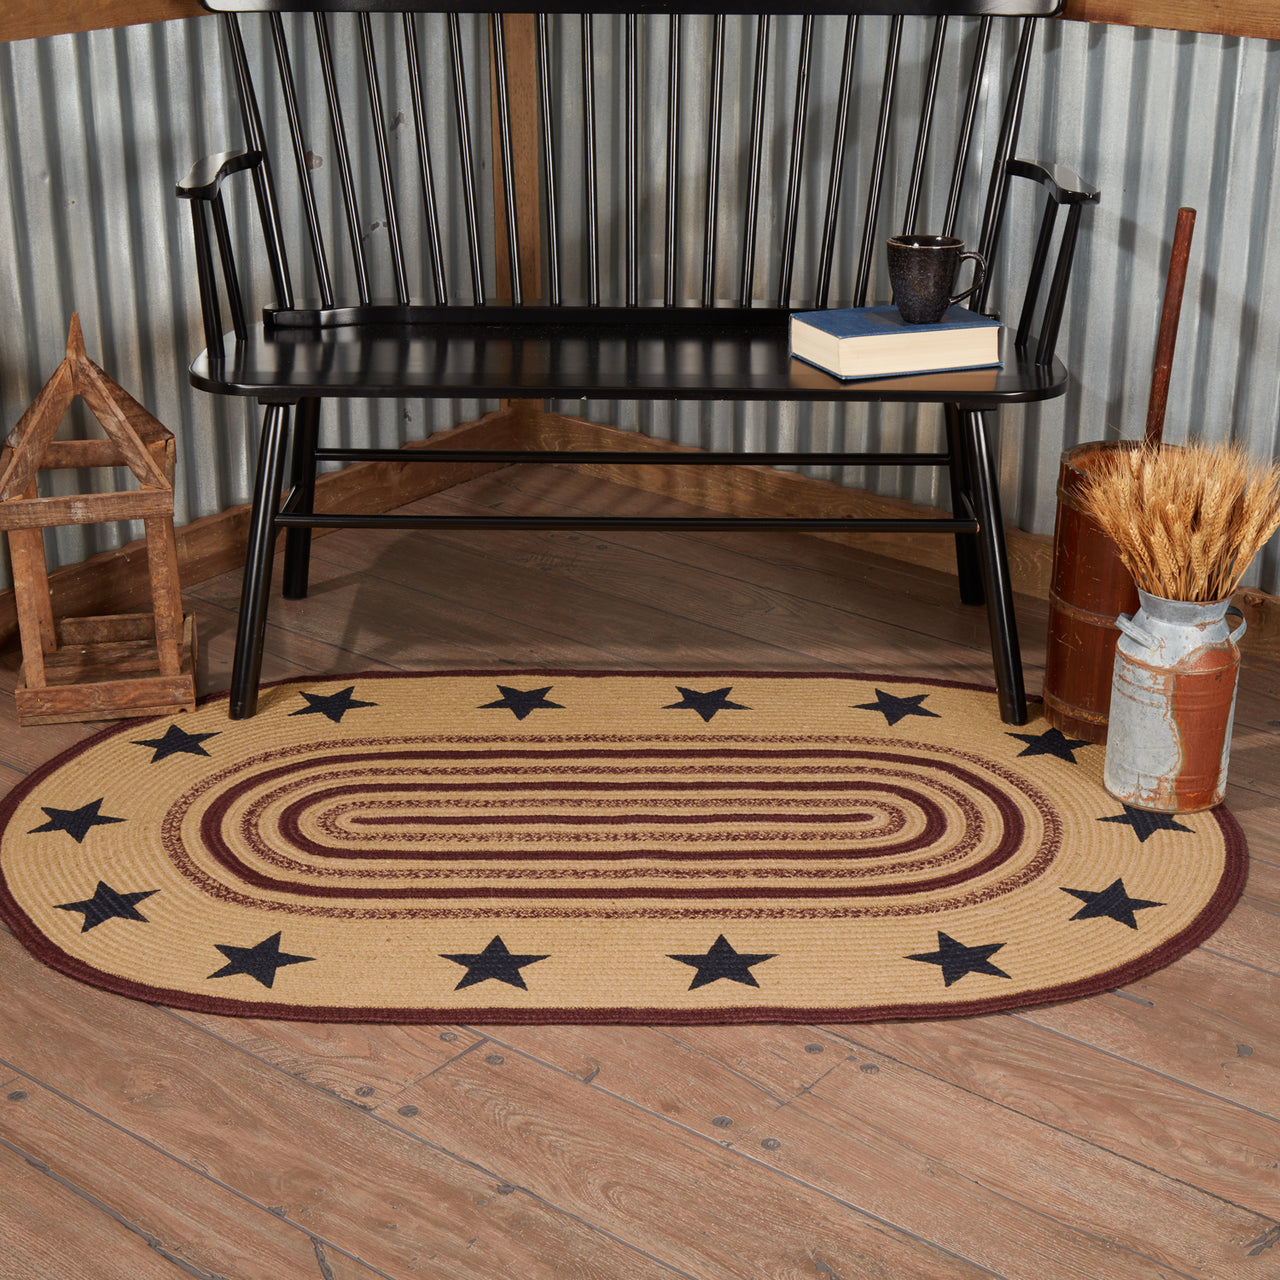 Potomac Jute Braided Rug Oval Stencil Stars 3'x5' with Rug Pad VHC Brands